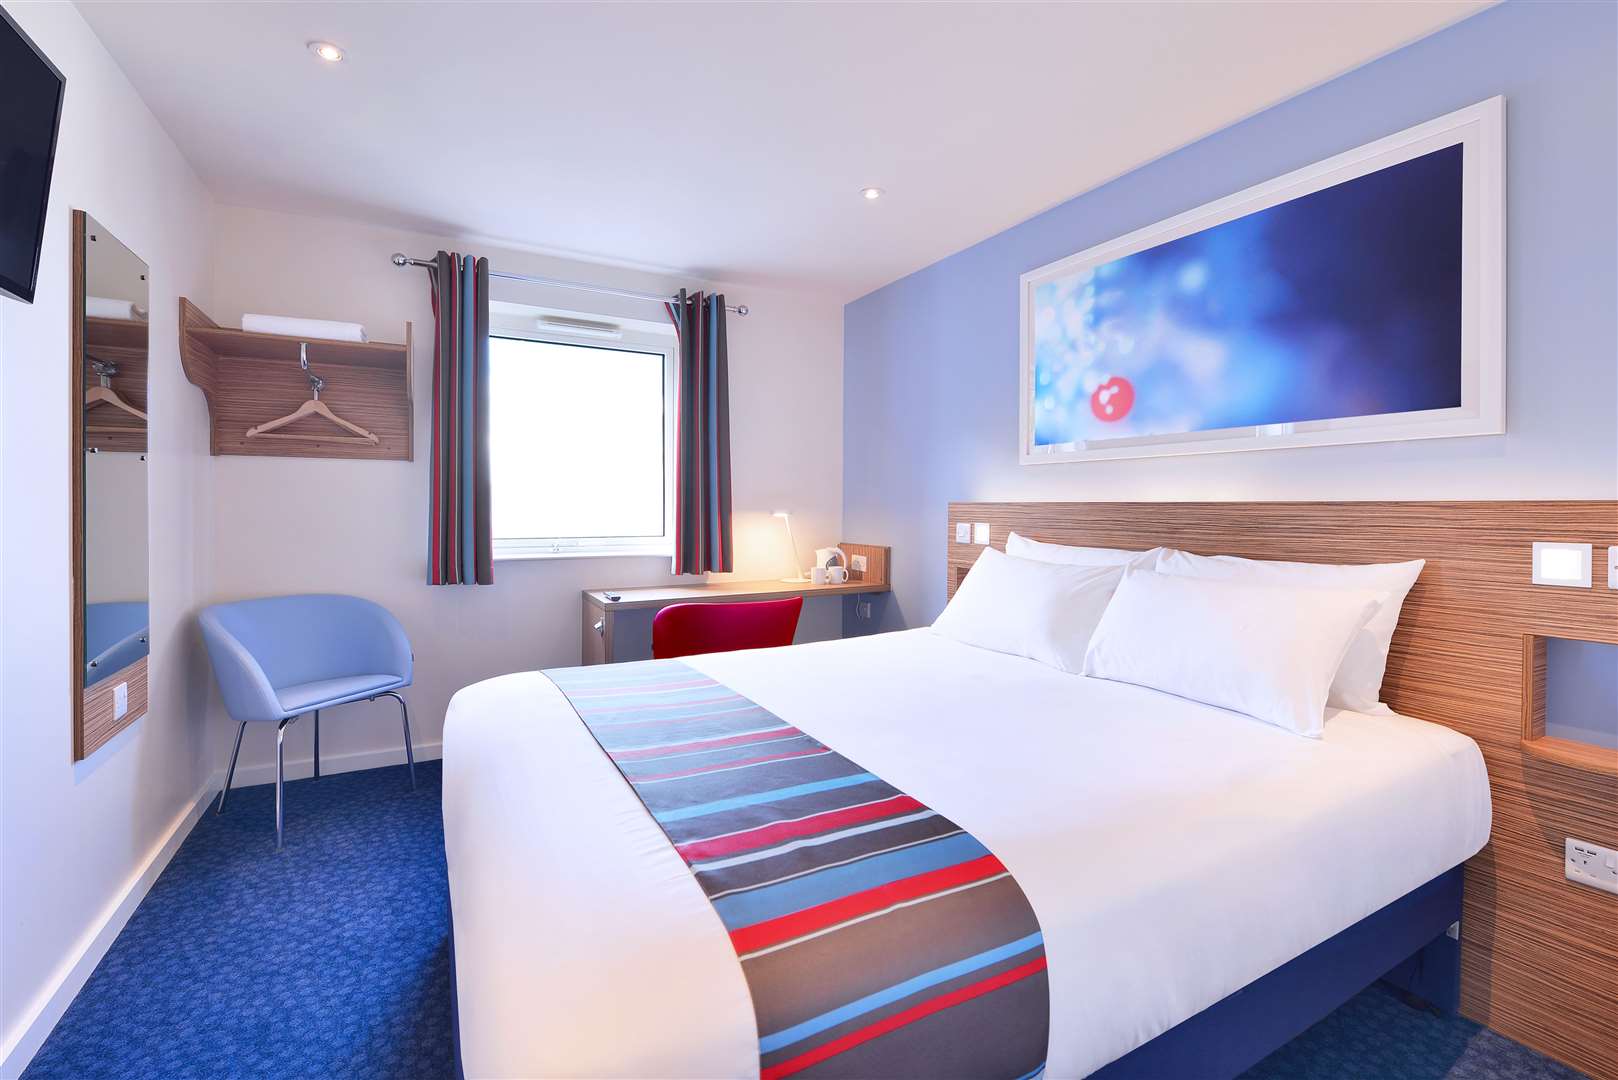 Travelodge continues to push forward with an aggressive growth strategy